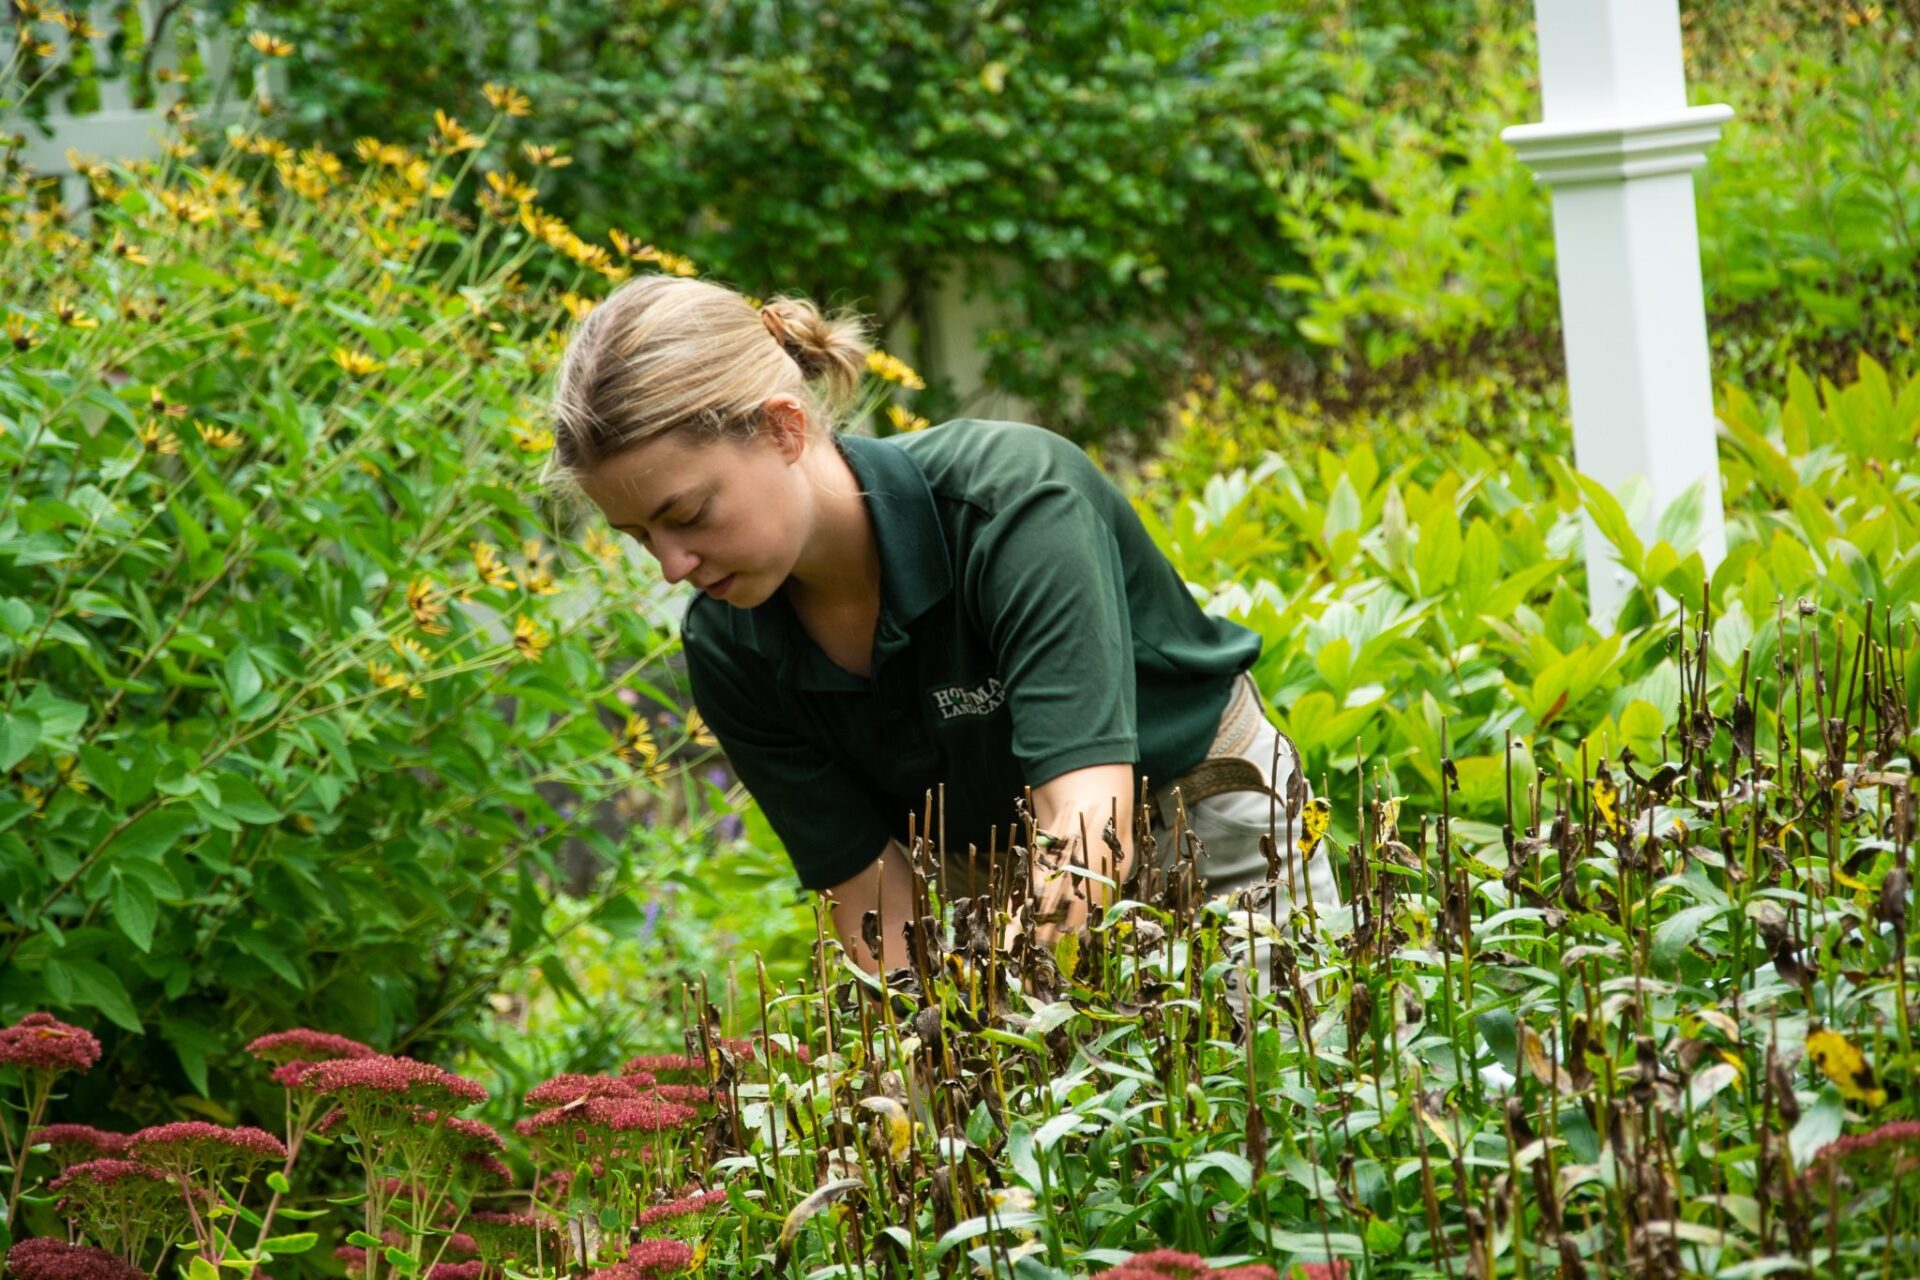 A person is tending to a garden, concentrating on plants, surrounded by lush green foliage and reddish flowers, wearing a dark green shirt.